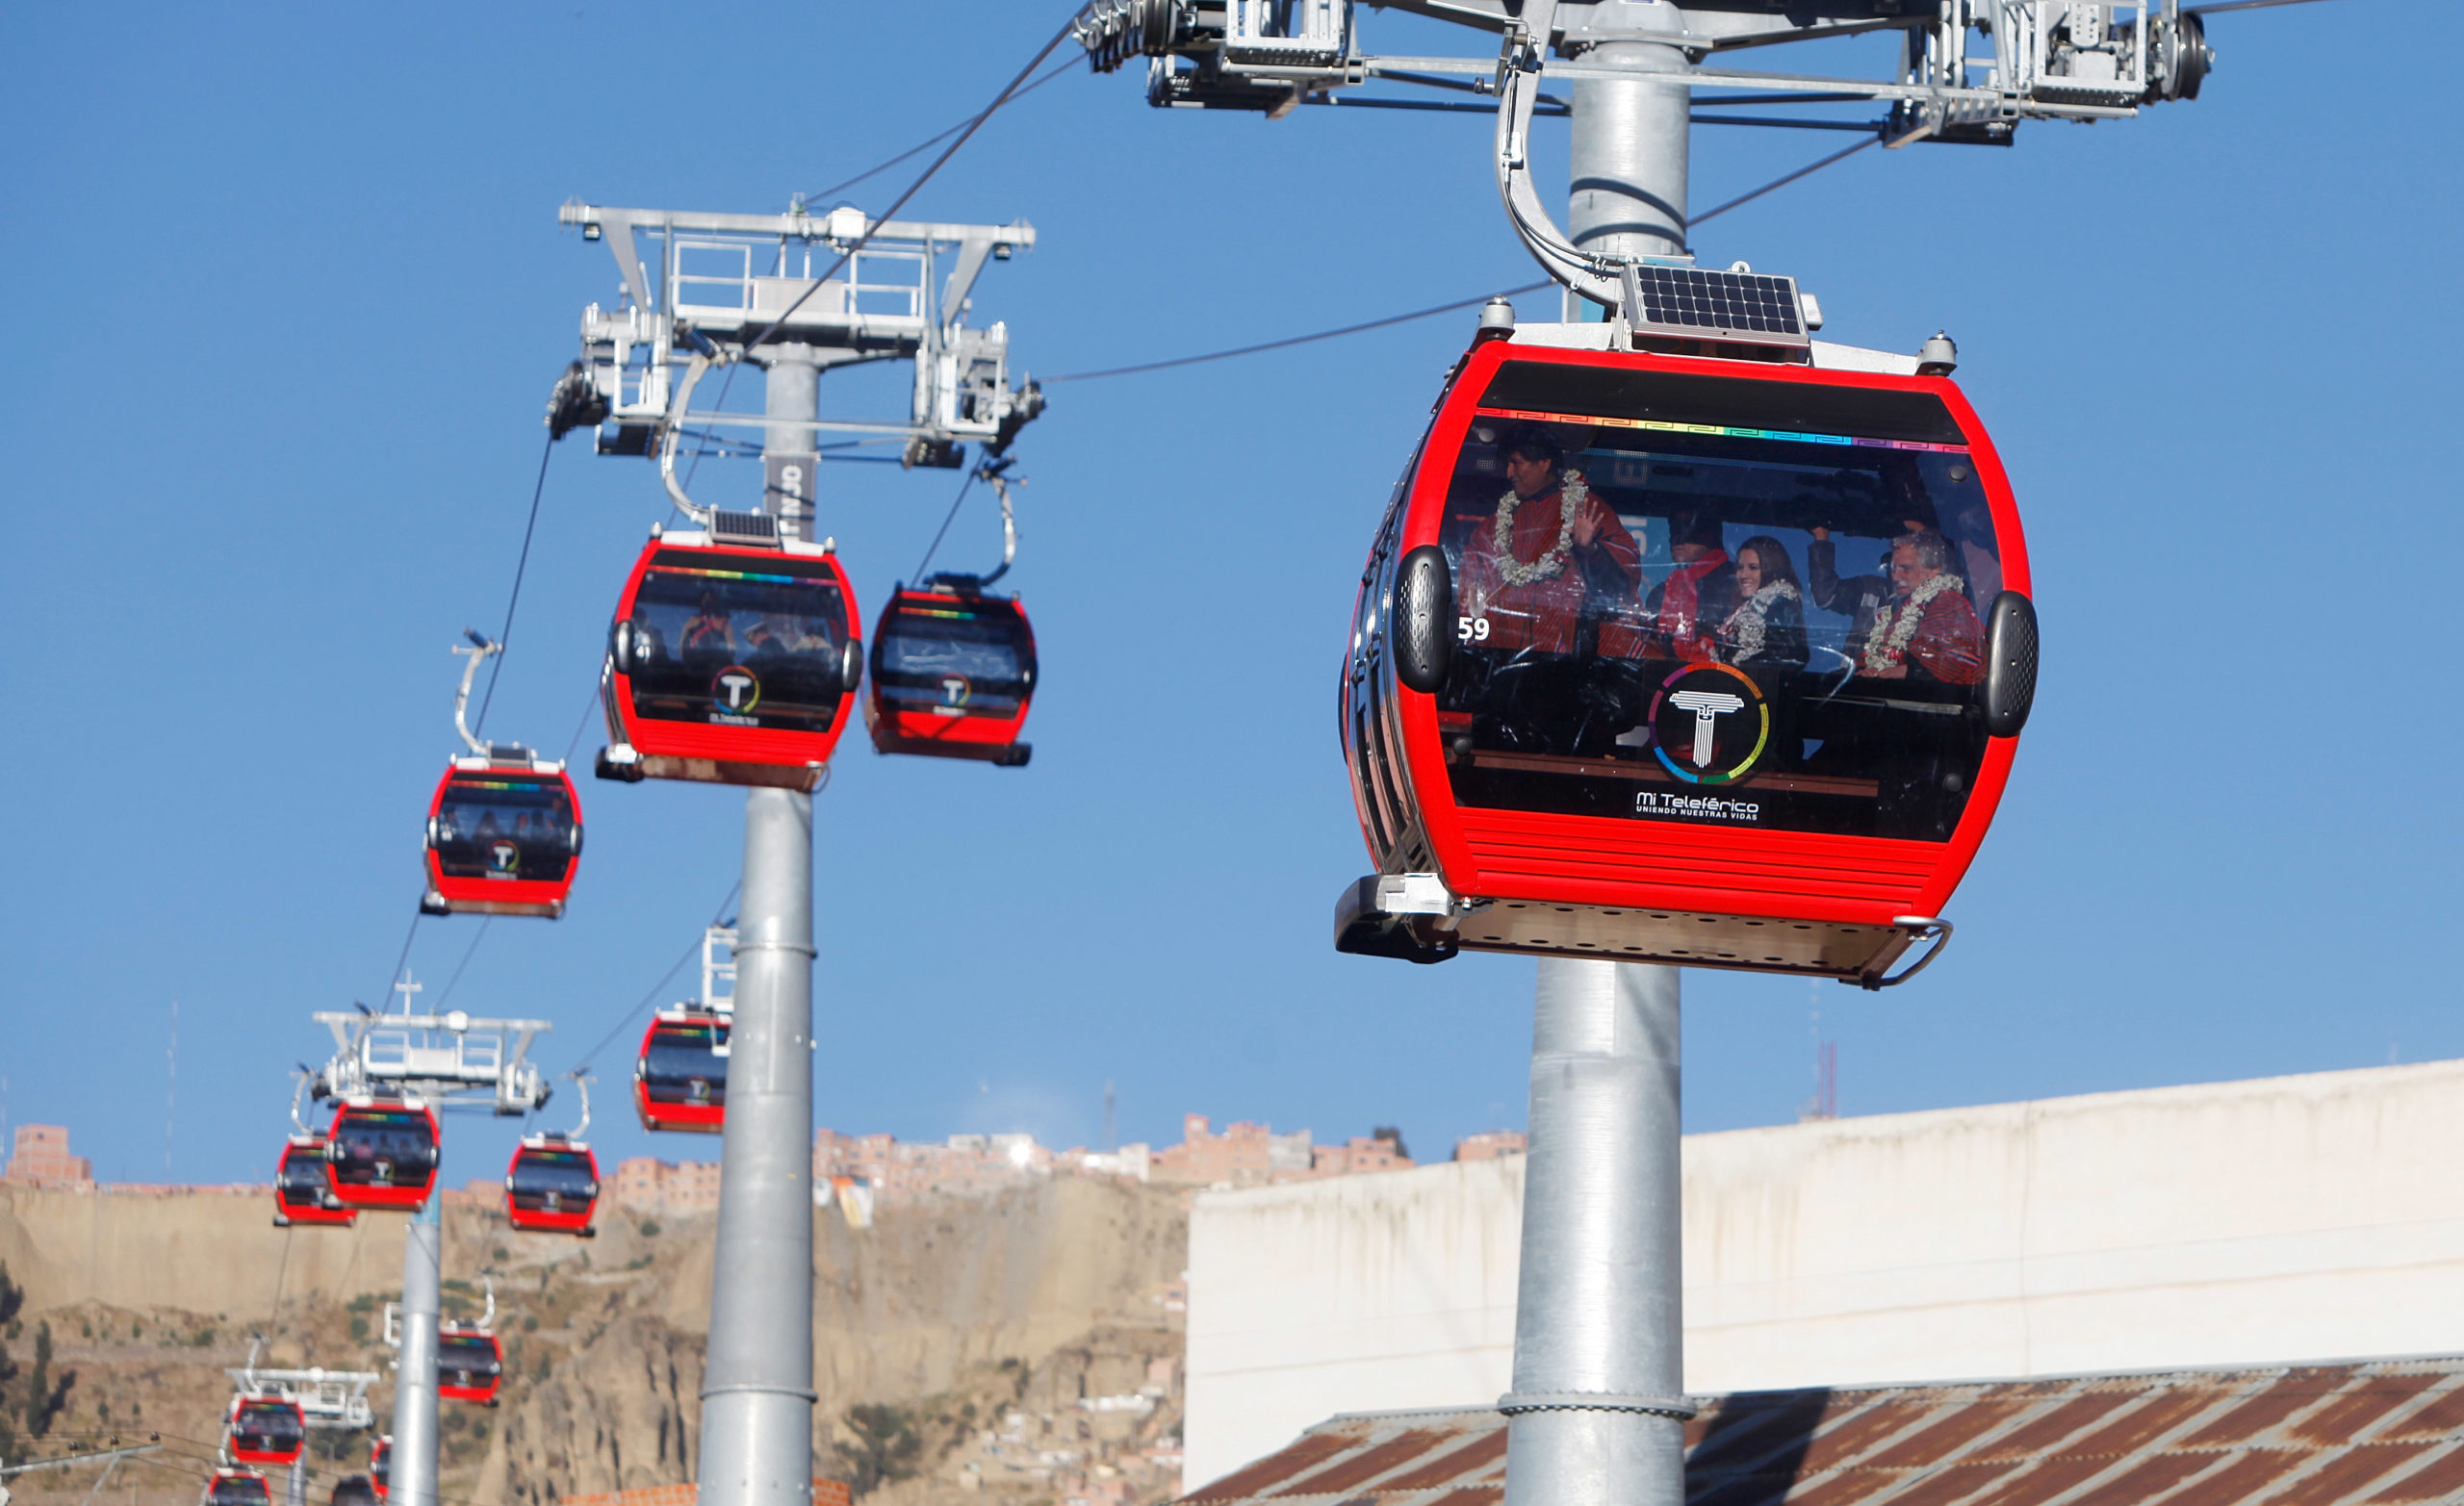 More Convincing Proof We Need To Build Gondolas Instead Of Train Stations